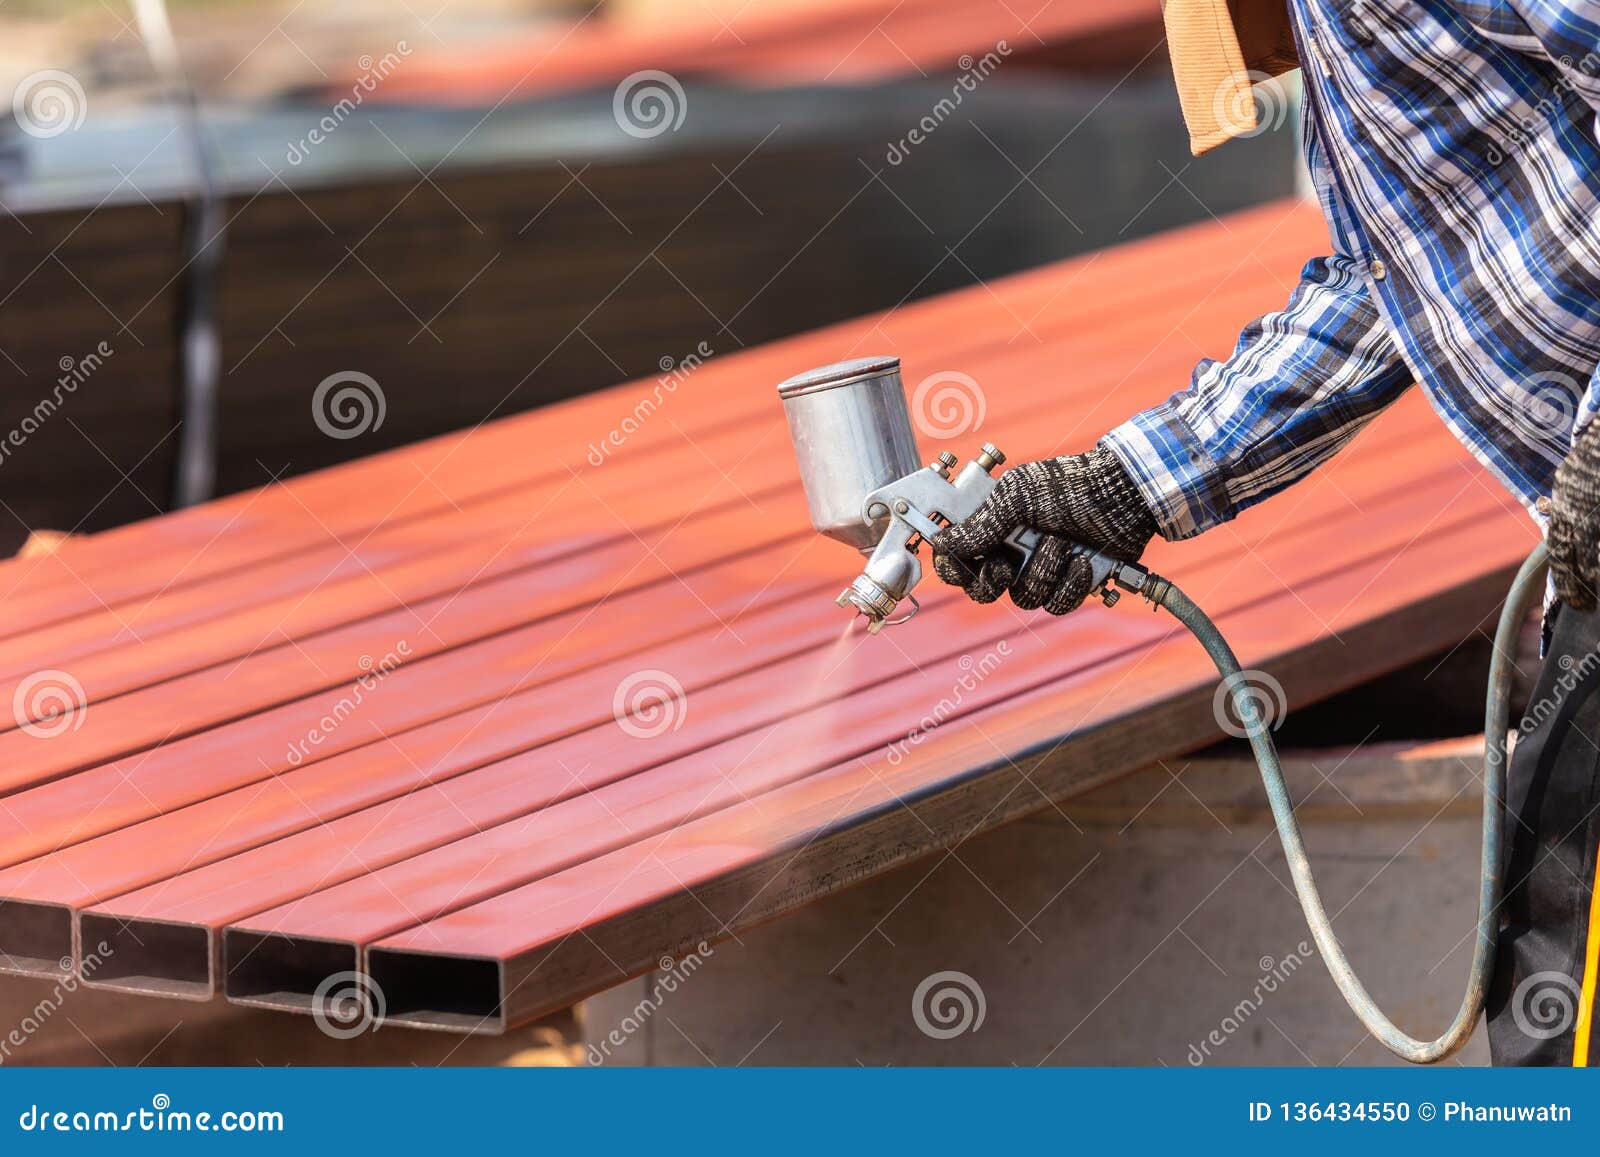 worker spraying paint to steel pipe to prevent the rust on the surface